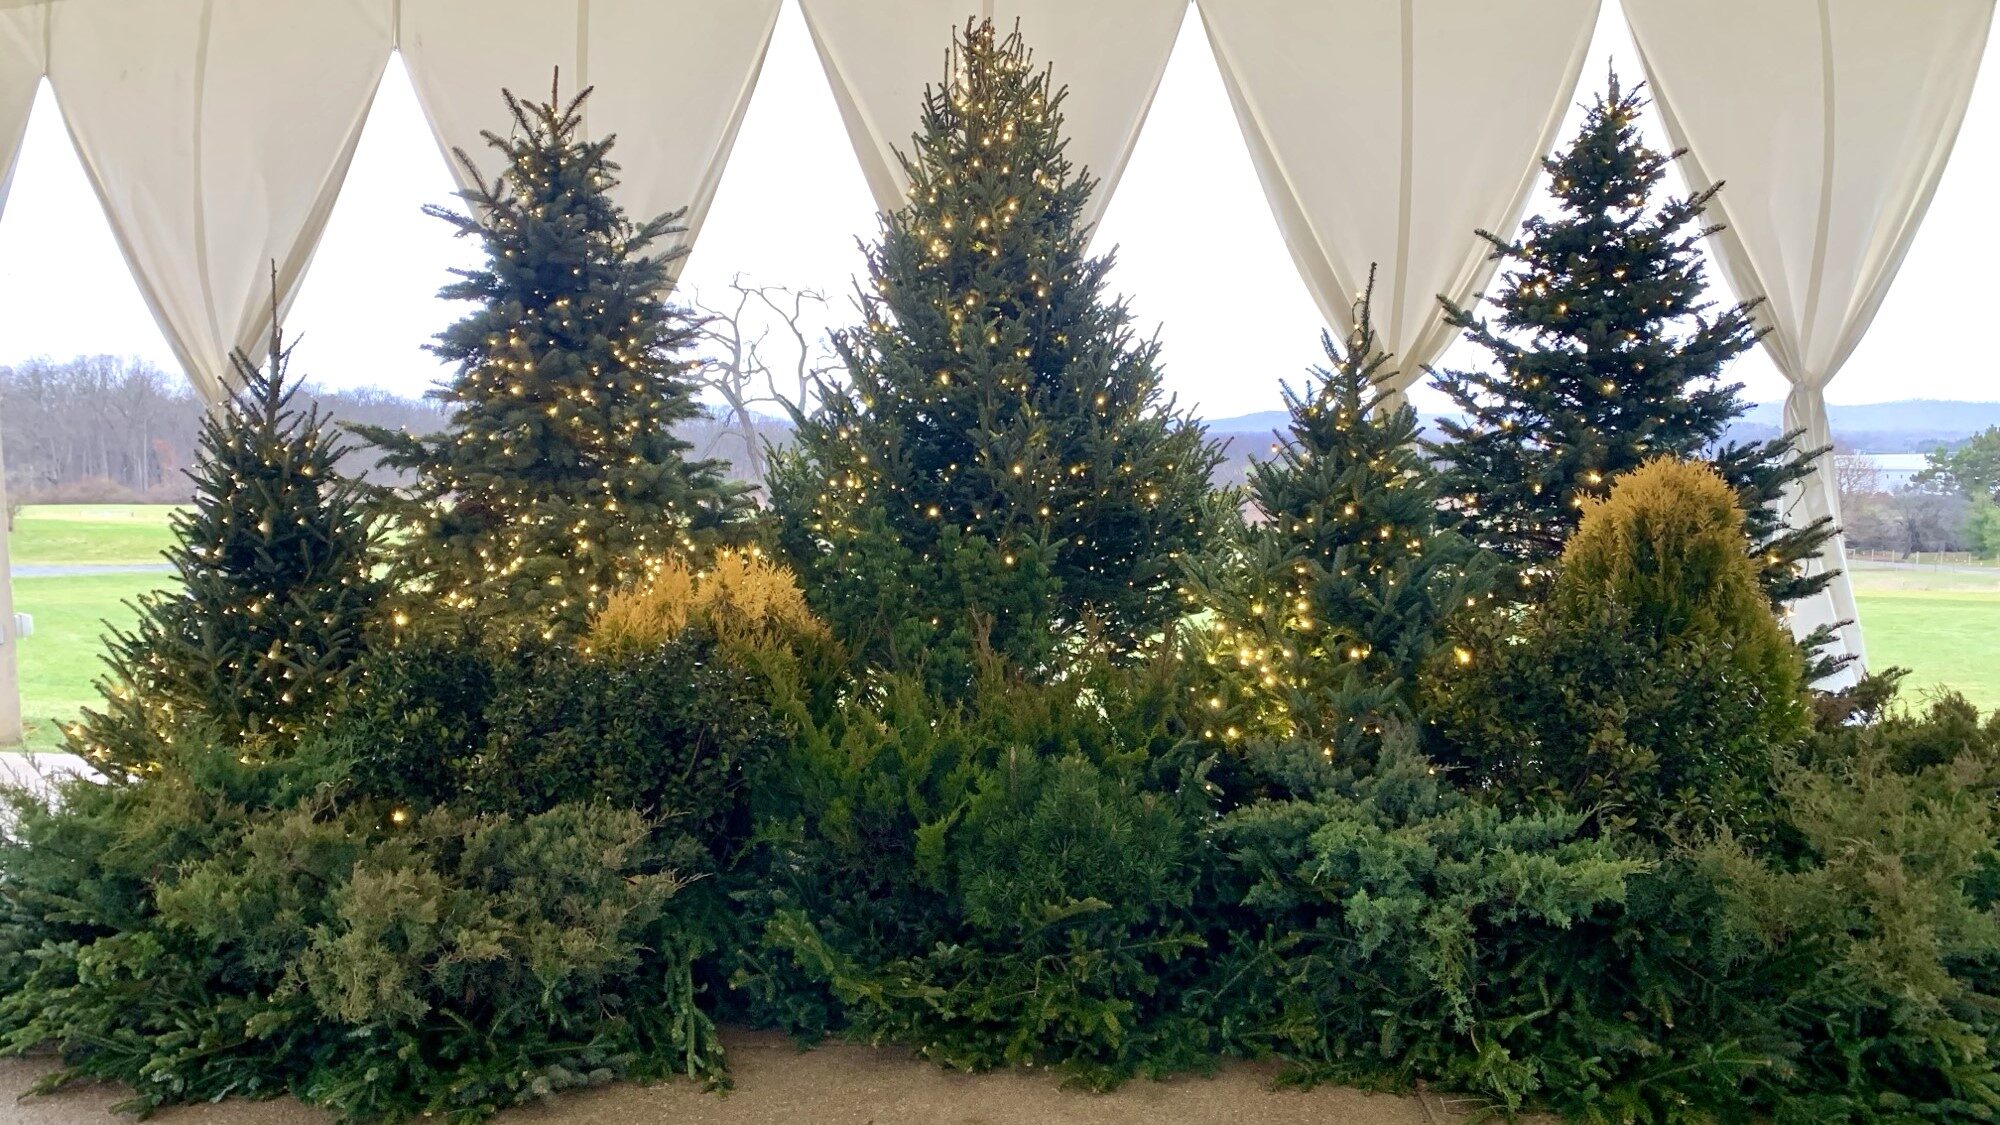 A winter display of evergreens decorated with lights.